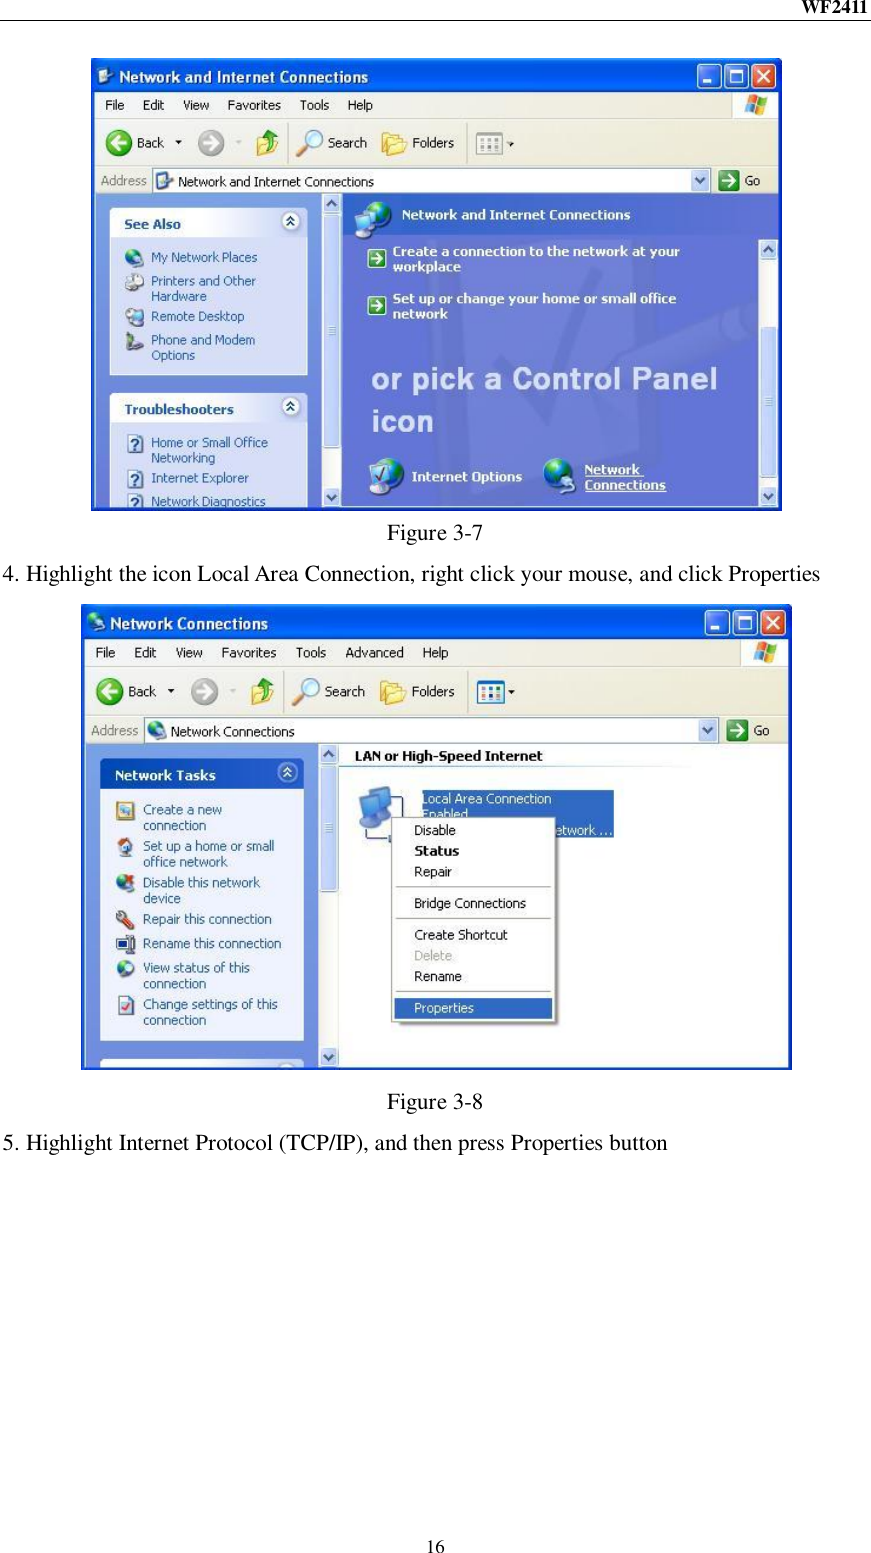 WF2411  16  Figure 3-7 4. Highlight the icon Local Area Connection, right click your mouse, and click Properties  Figure 3-8 5. Highlight Internet Protocol (TCP/IP), and then press Properties button 